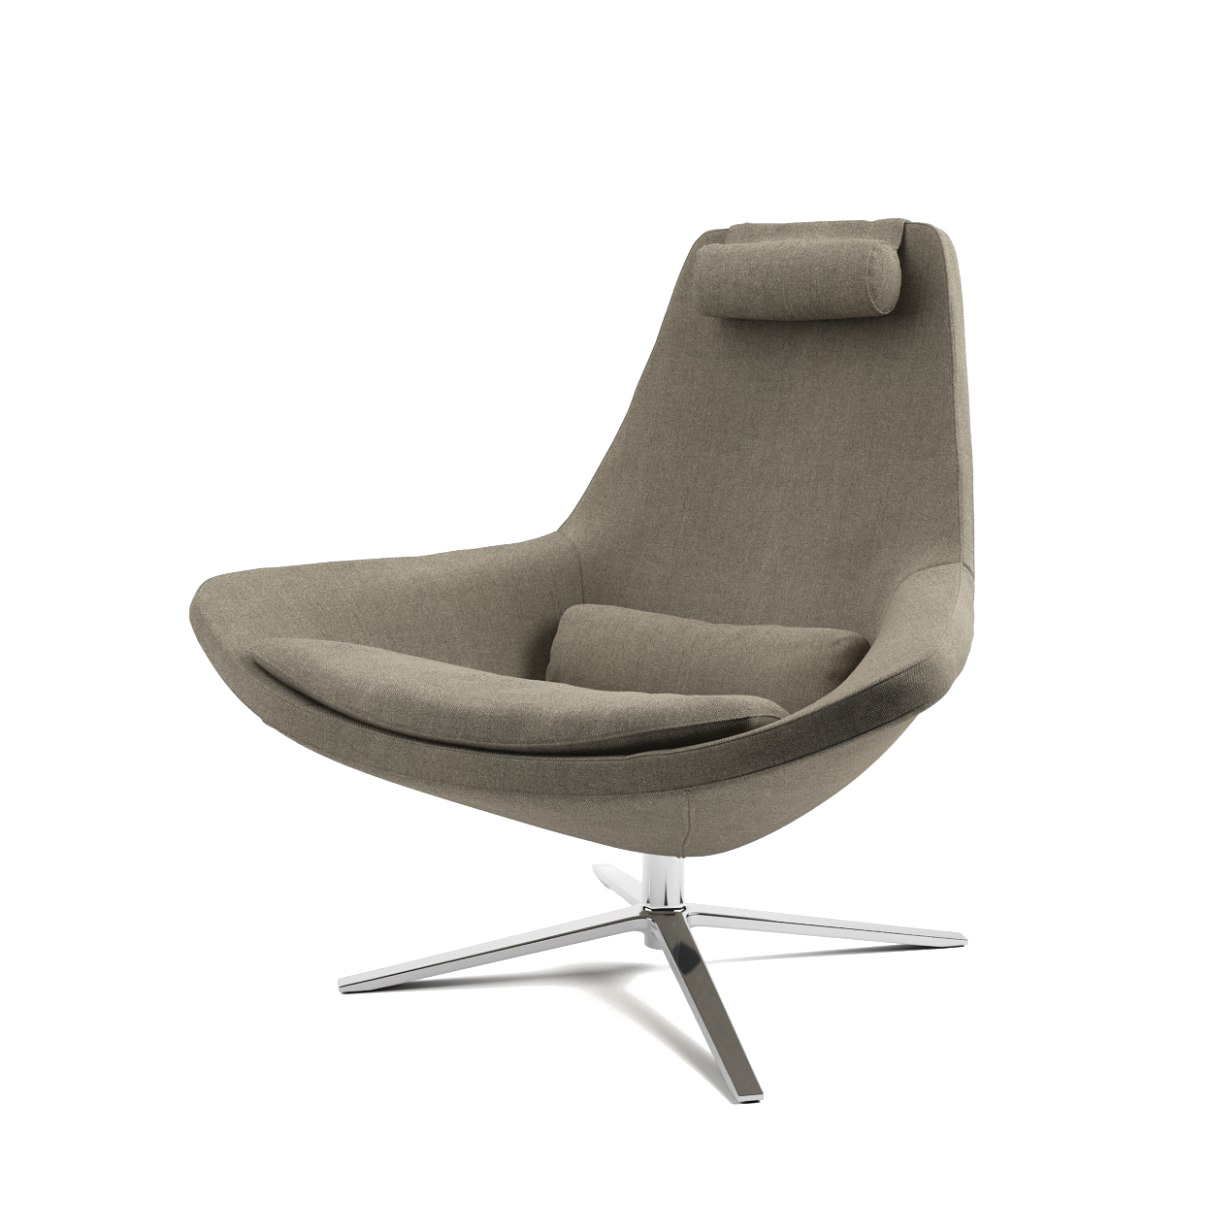 Lounge Chair Top View Png